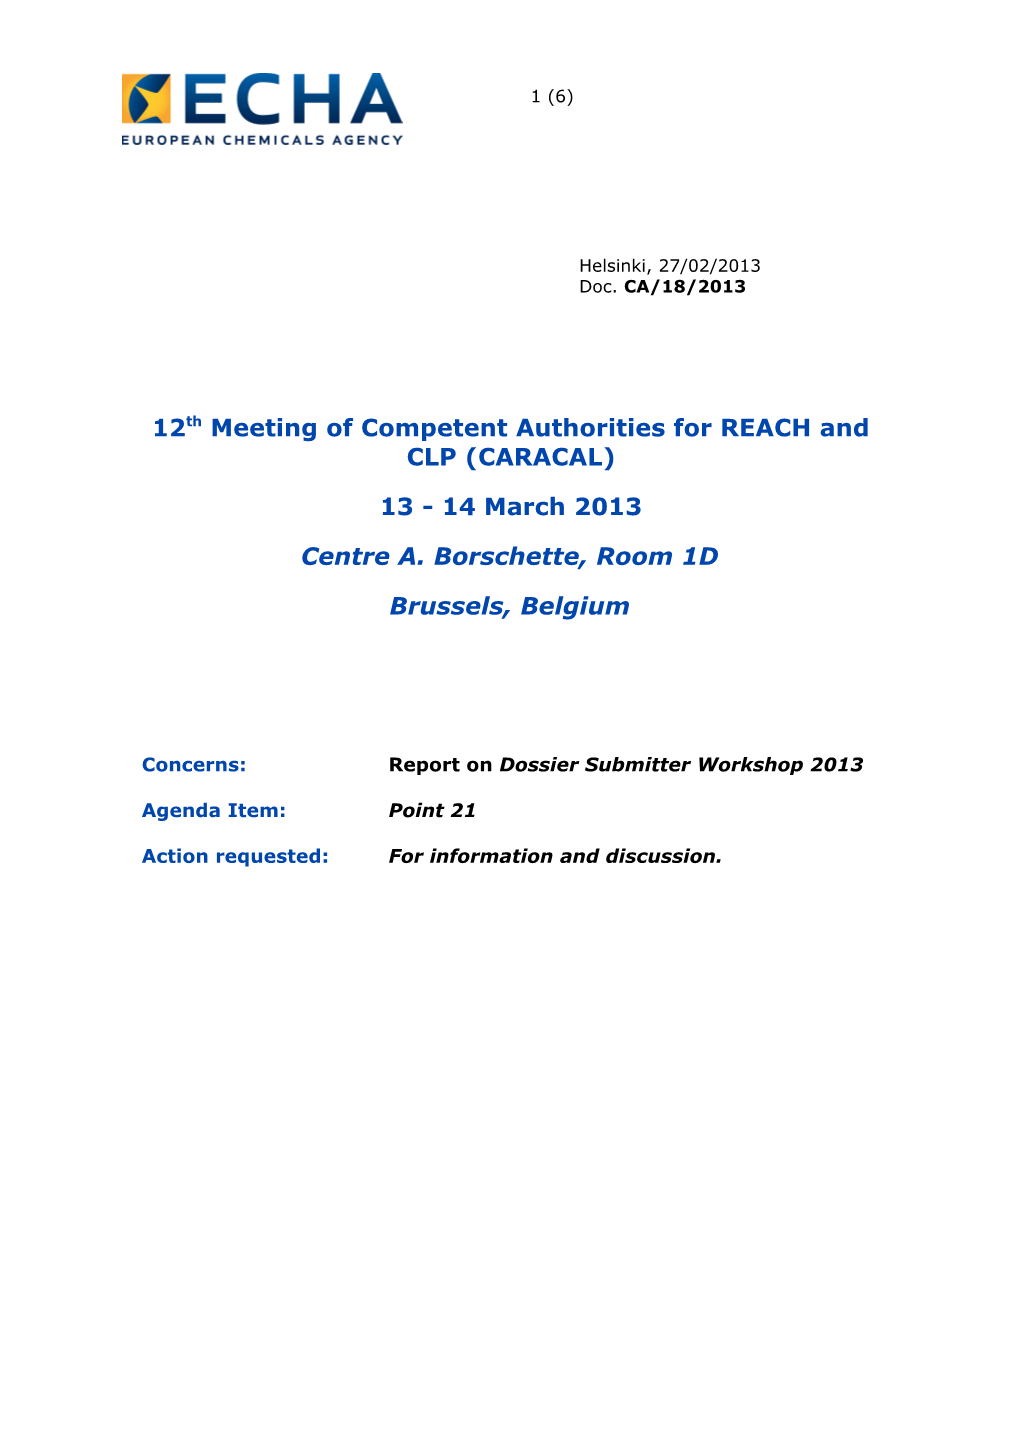 12Th Meeting of Competent Authorities for REACH and CLP (CARACAL)